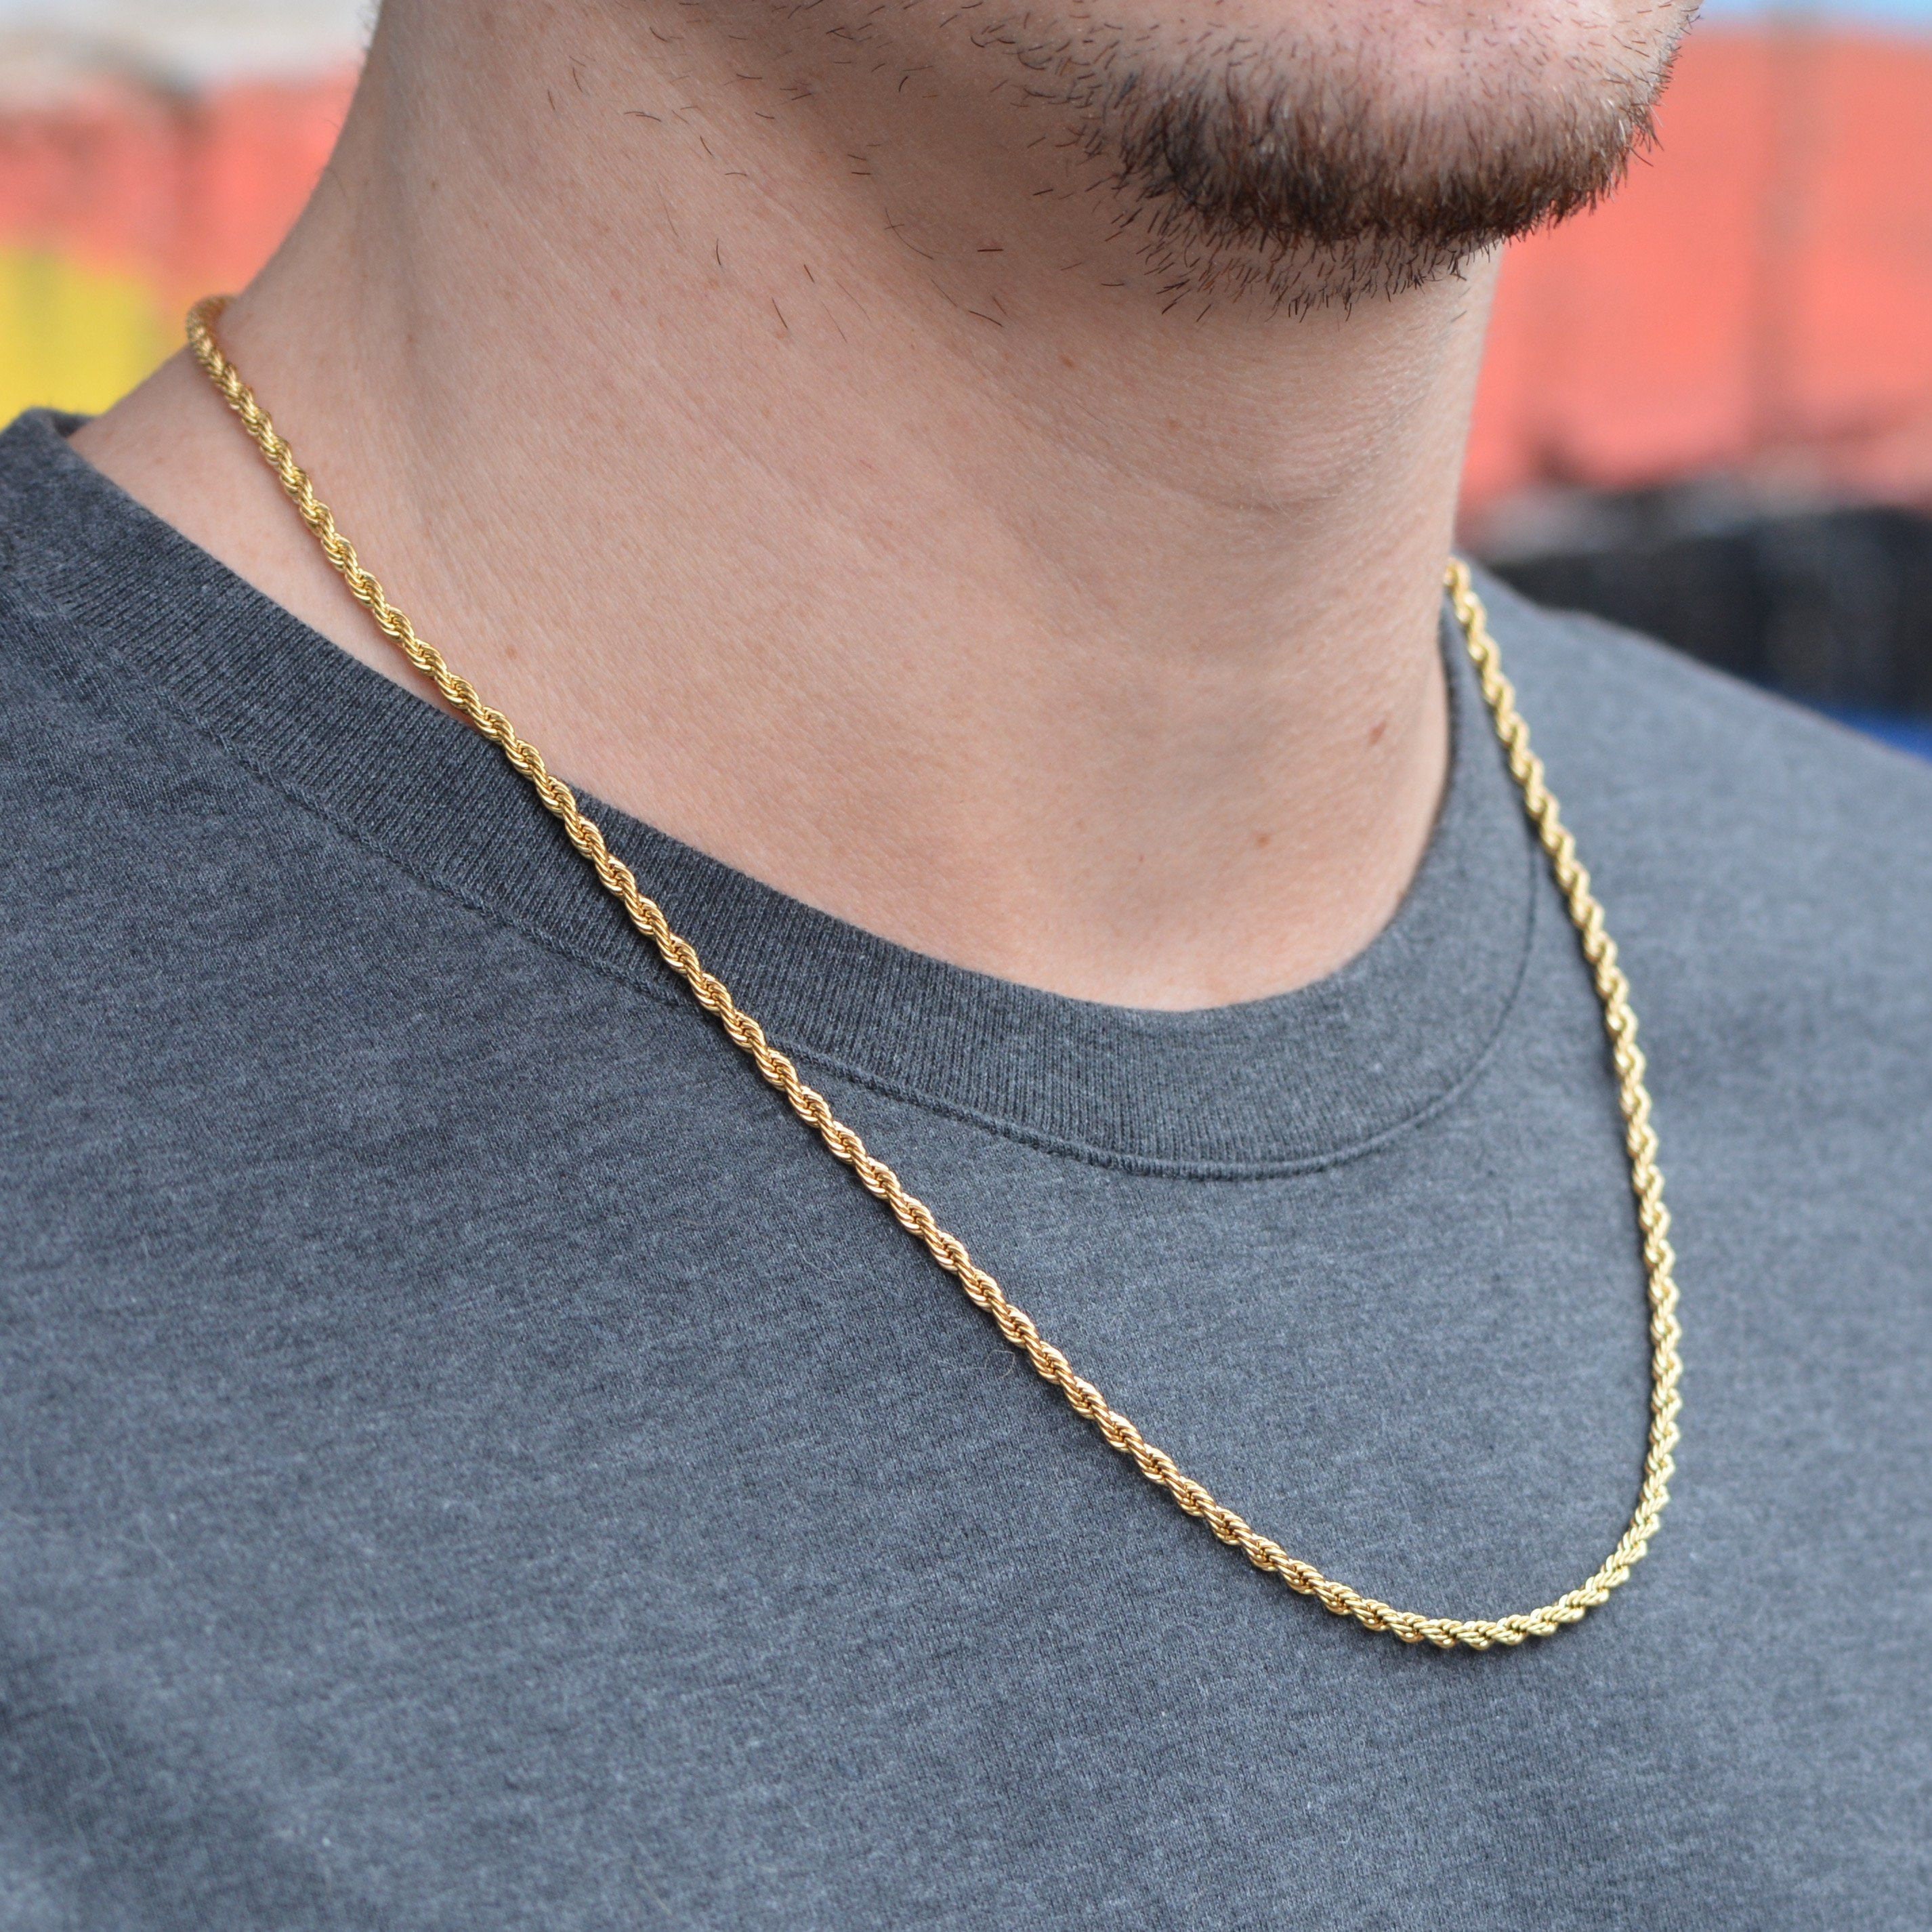 Gold Rope Chain Necklace For Men 2mm Rope Chain Silver Rope, 57% OFF